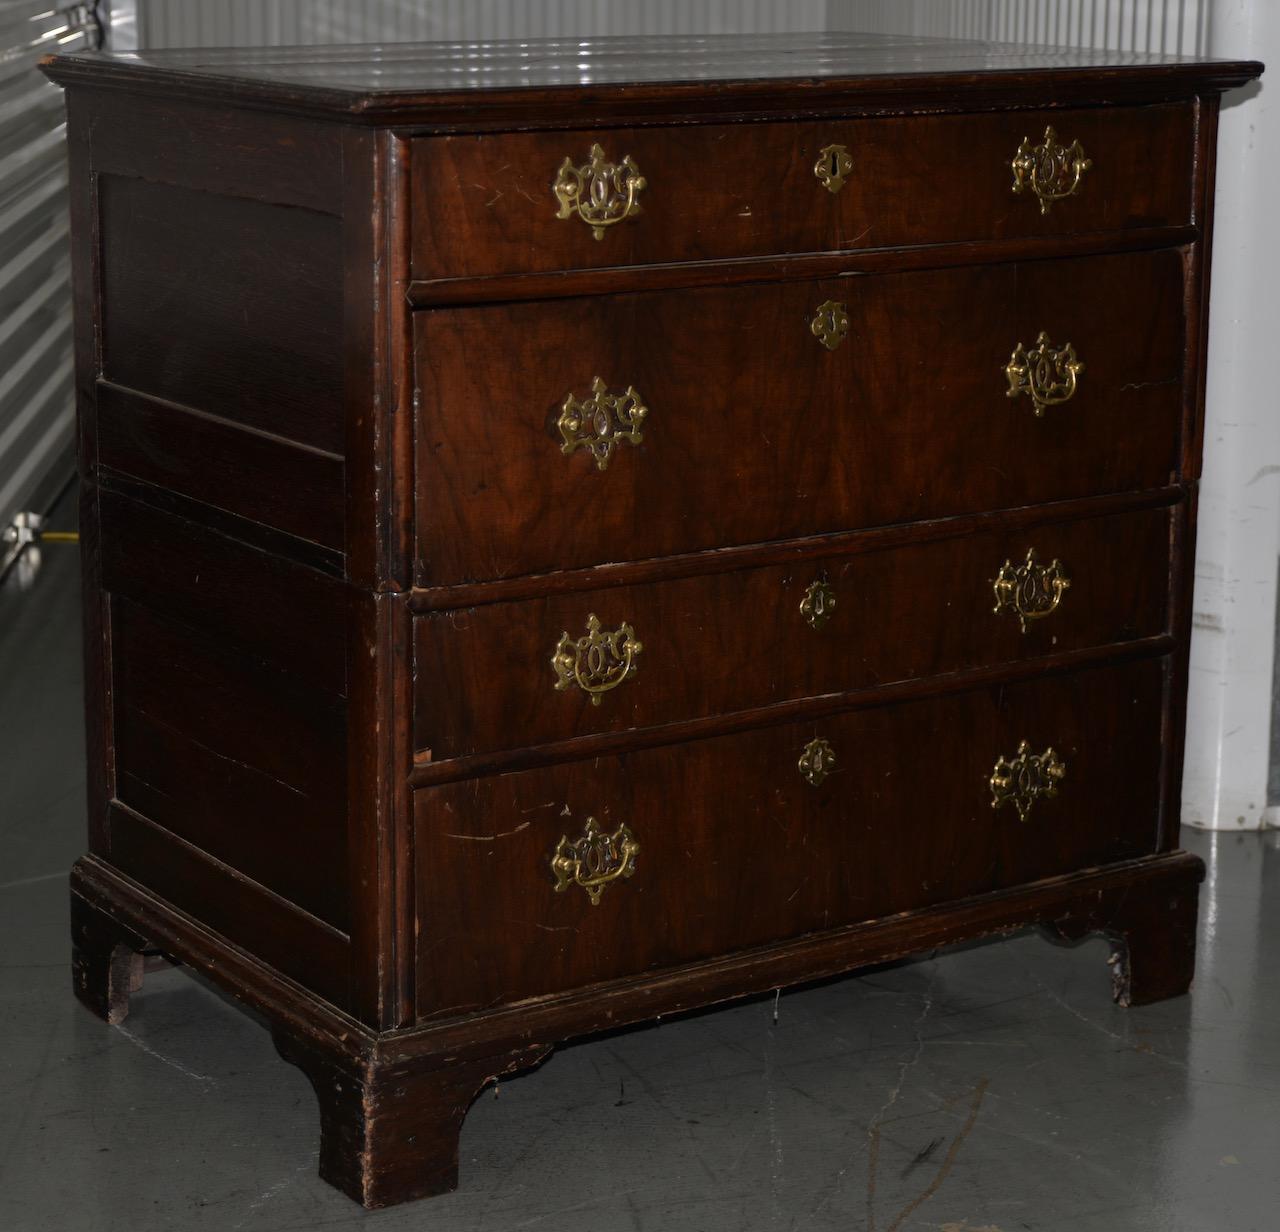 Early American George III Mahogany chest of drawers, 18th-19th century

Fine antique chest of drawers. The top two drawers stack on the bottom two drawers. The back is unfinished panel, the sides are finished panels. Each drawer is deep and solid.